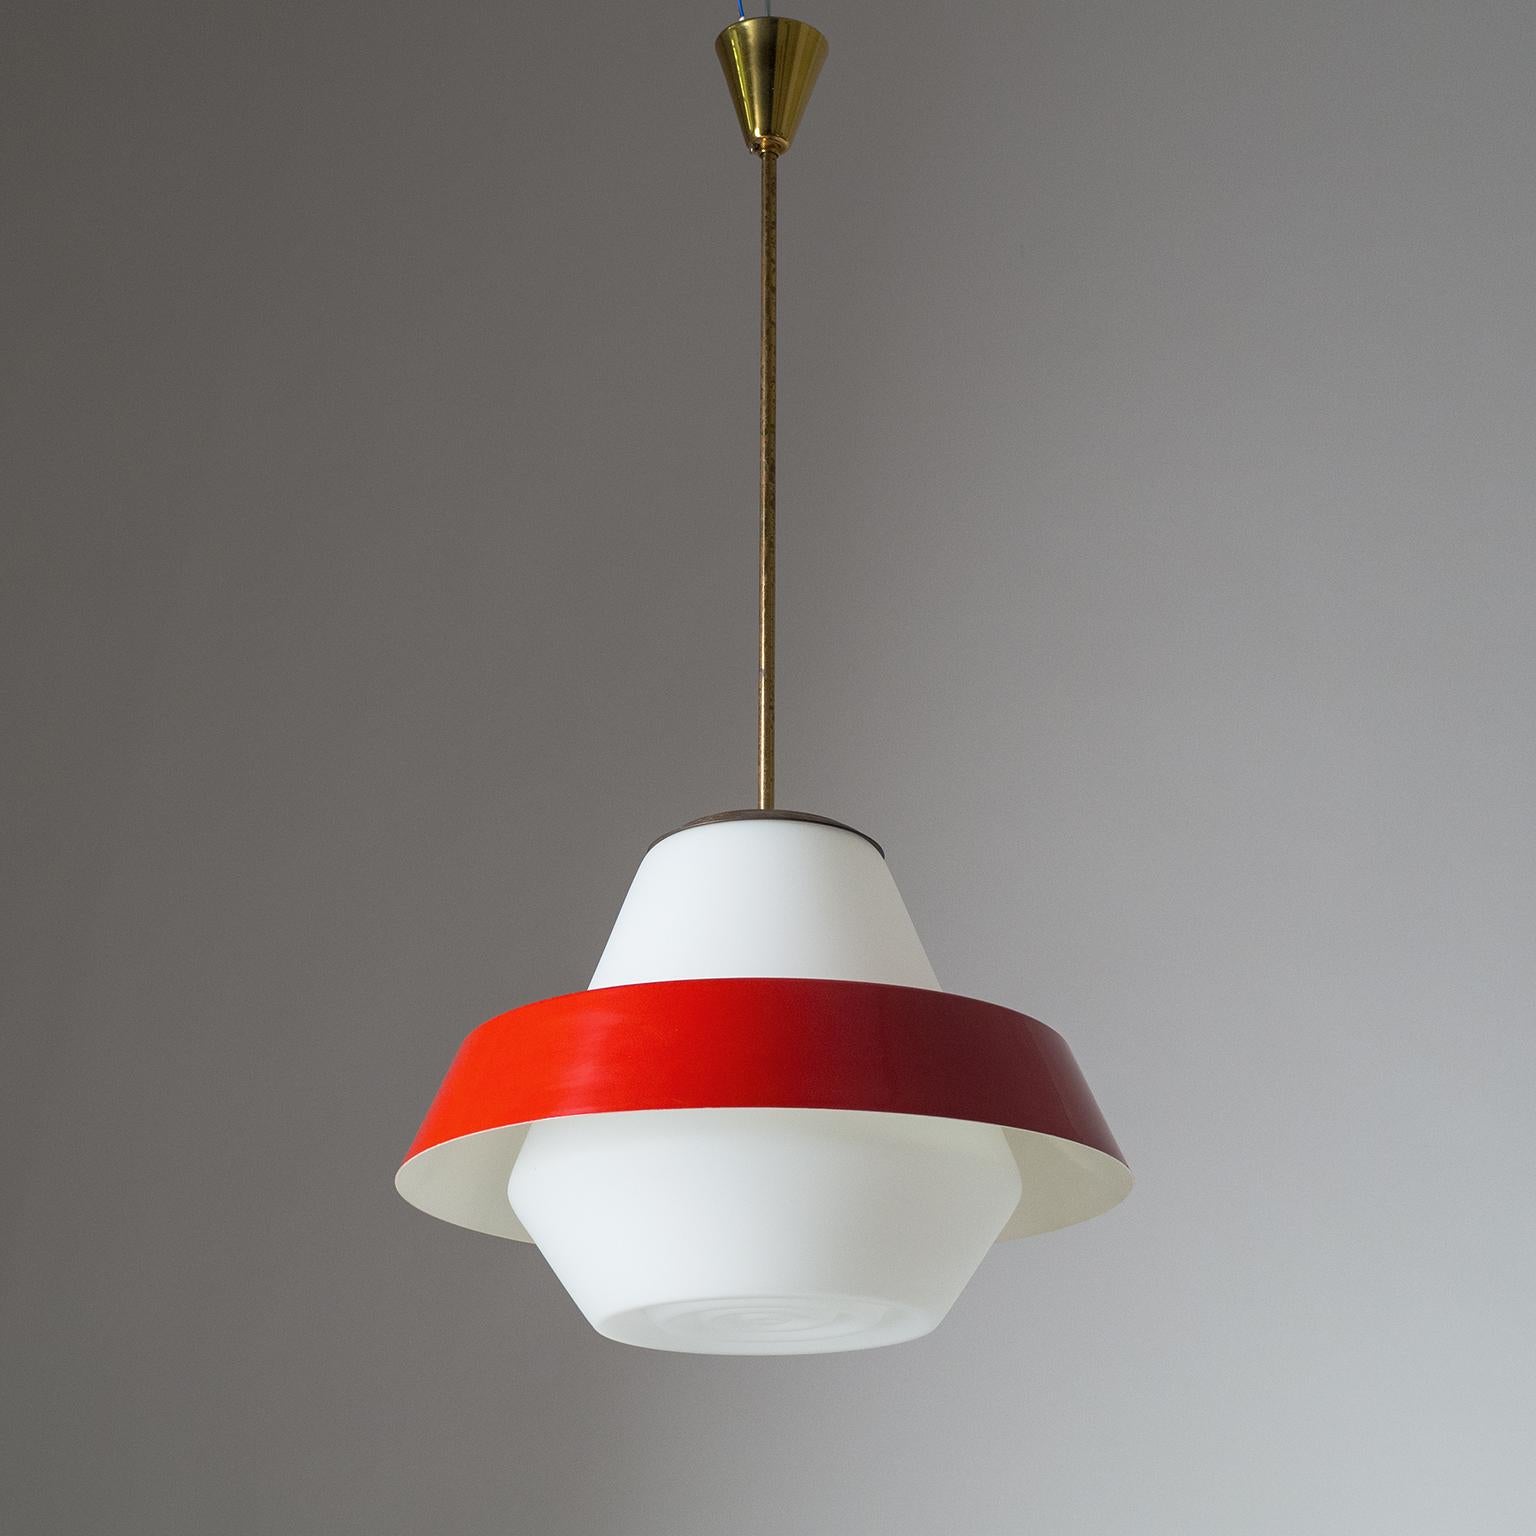 Large Italian midcentury lantern or pendant with a big satin glass diffuser and a red lacquered aluminum shade. The unusual glass has a double conical shape with a concentric rings structure on the bottom. Very nice original condition with minor